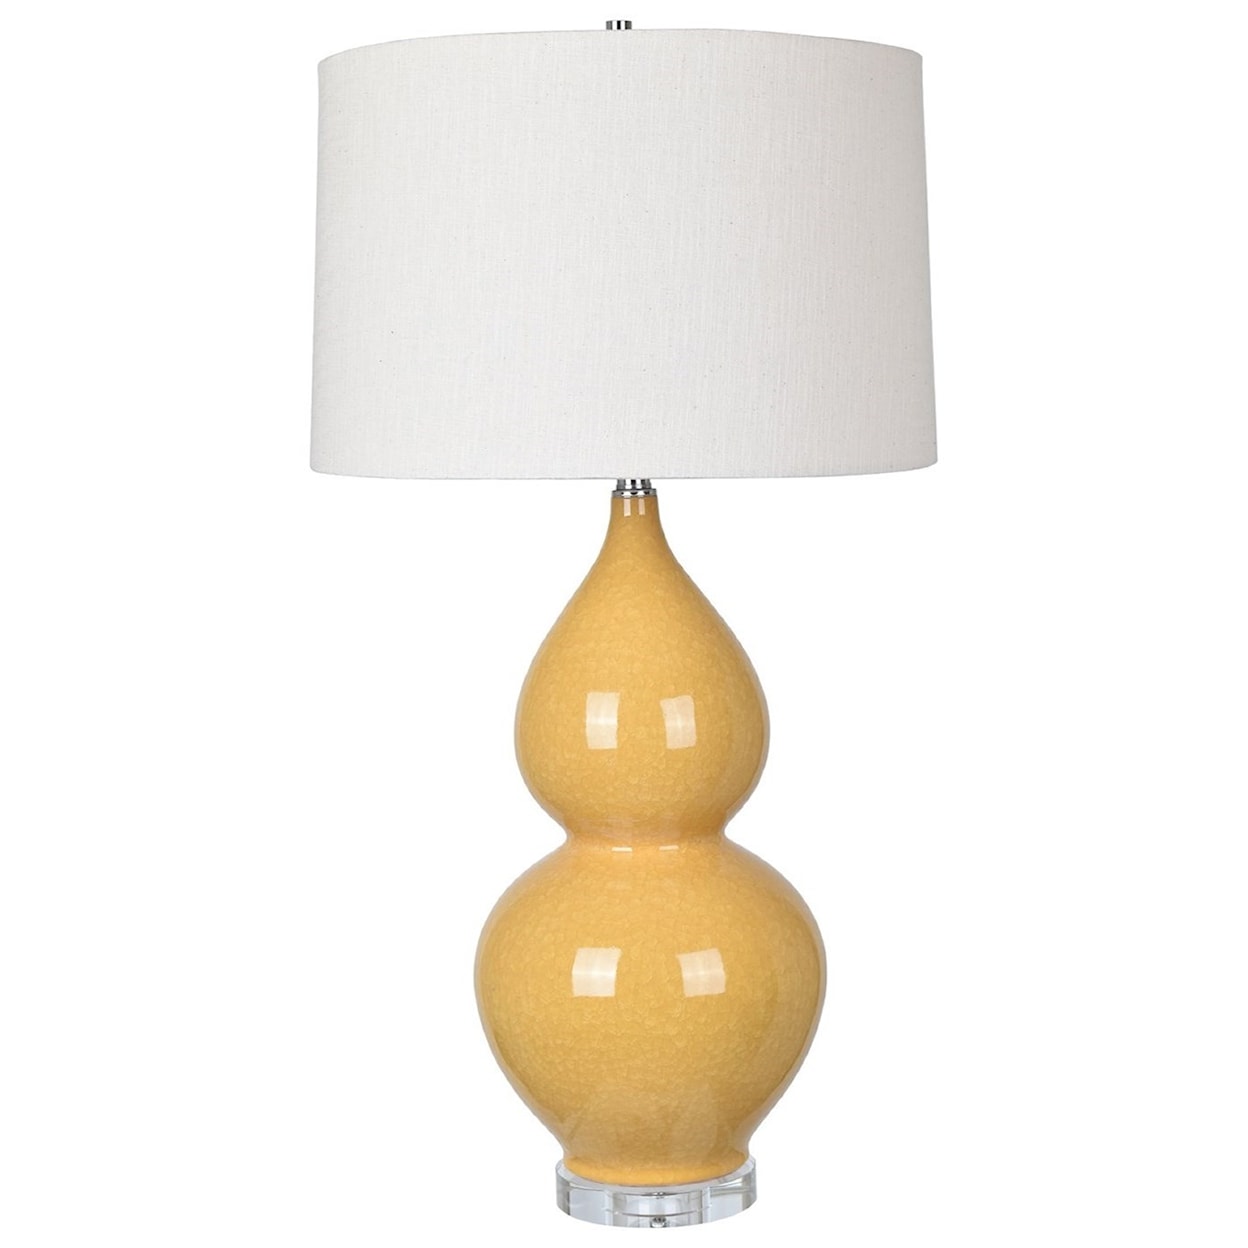 Crestview Collection Lighting Jaipur Table Lamp